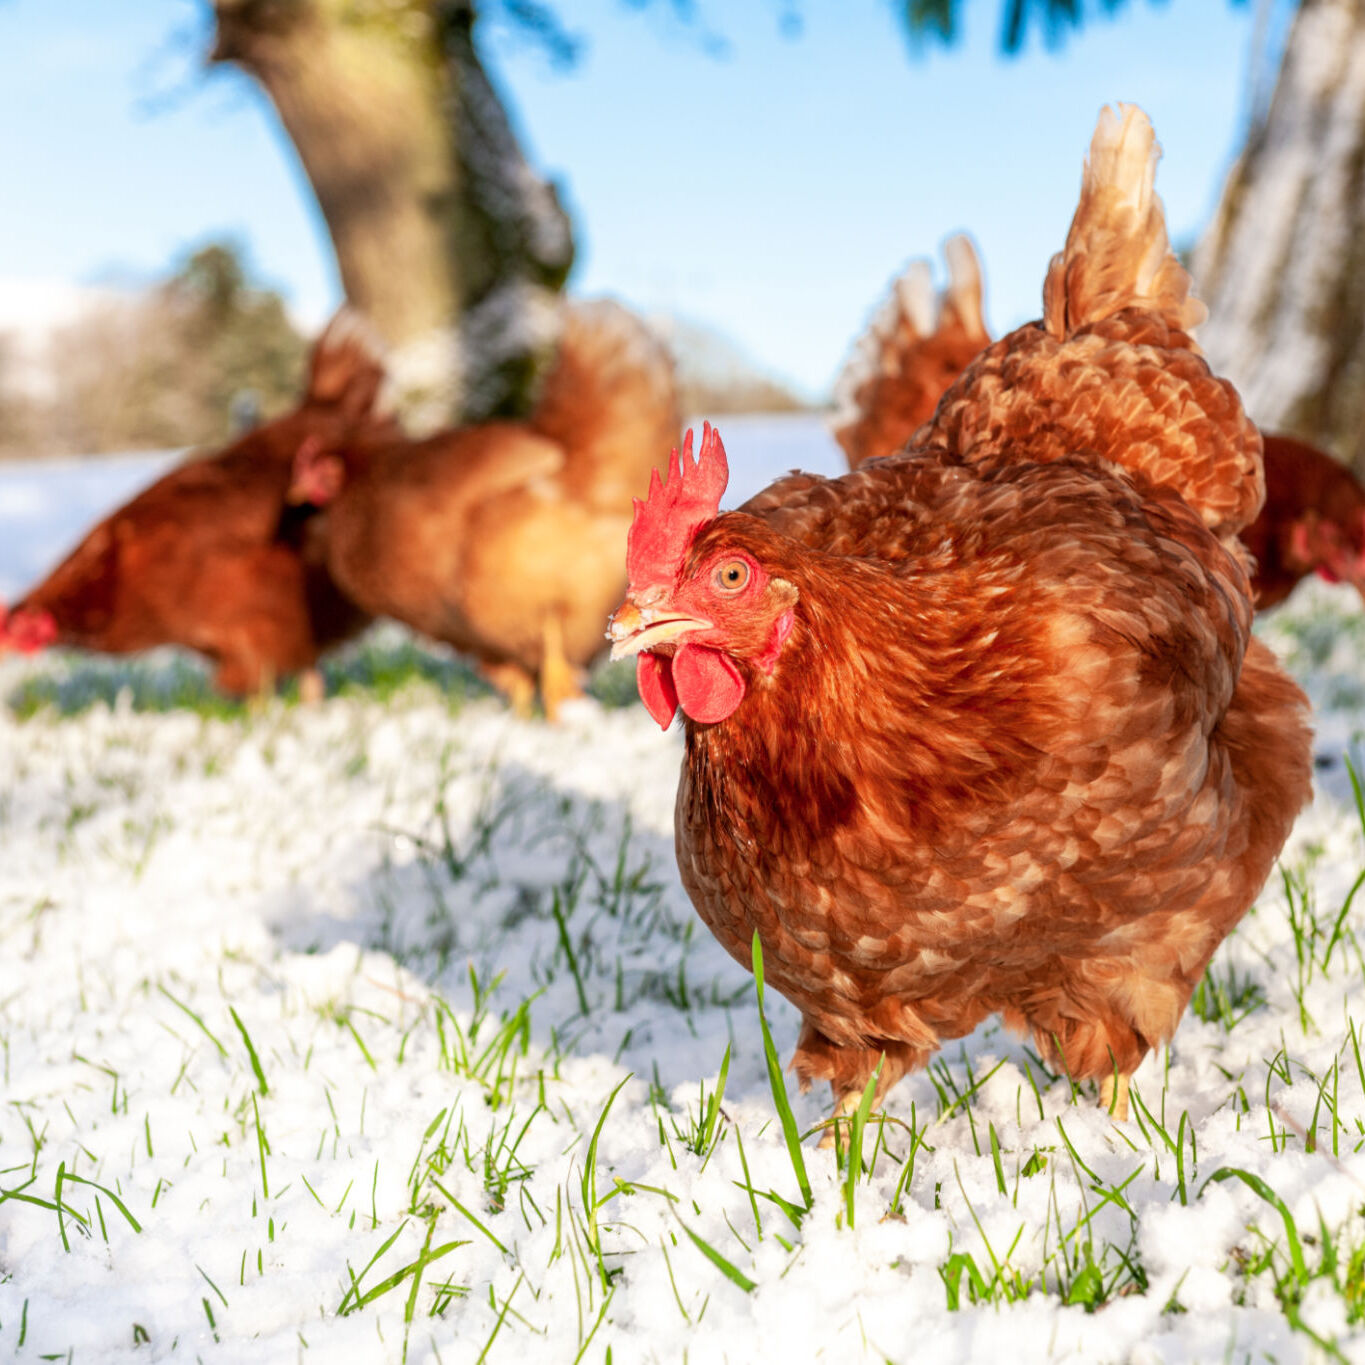 chickens are free ranging outdoor in the winter morning